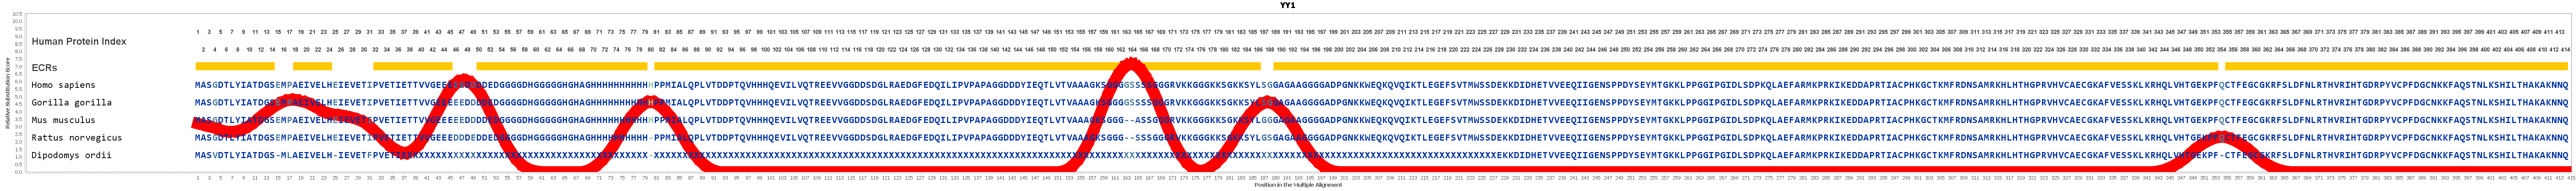 Yy1 Gene Genecards Tyy1 Protein Tyy1 Antibody - auto clicker download for roblox yang vs yin